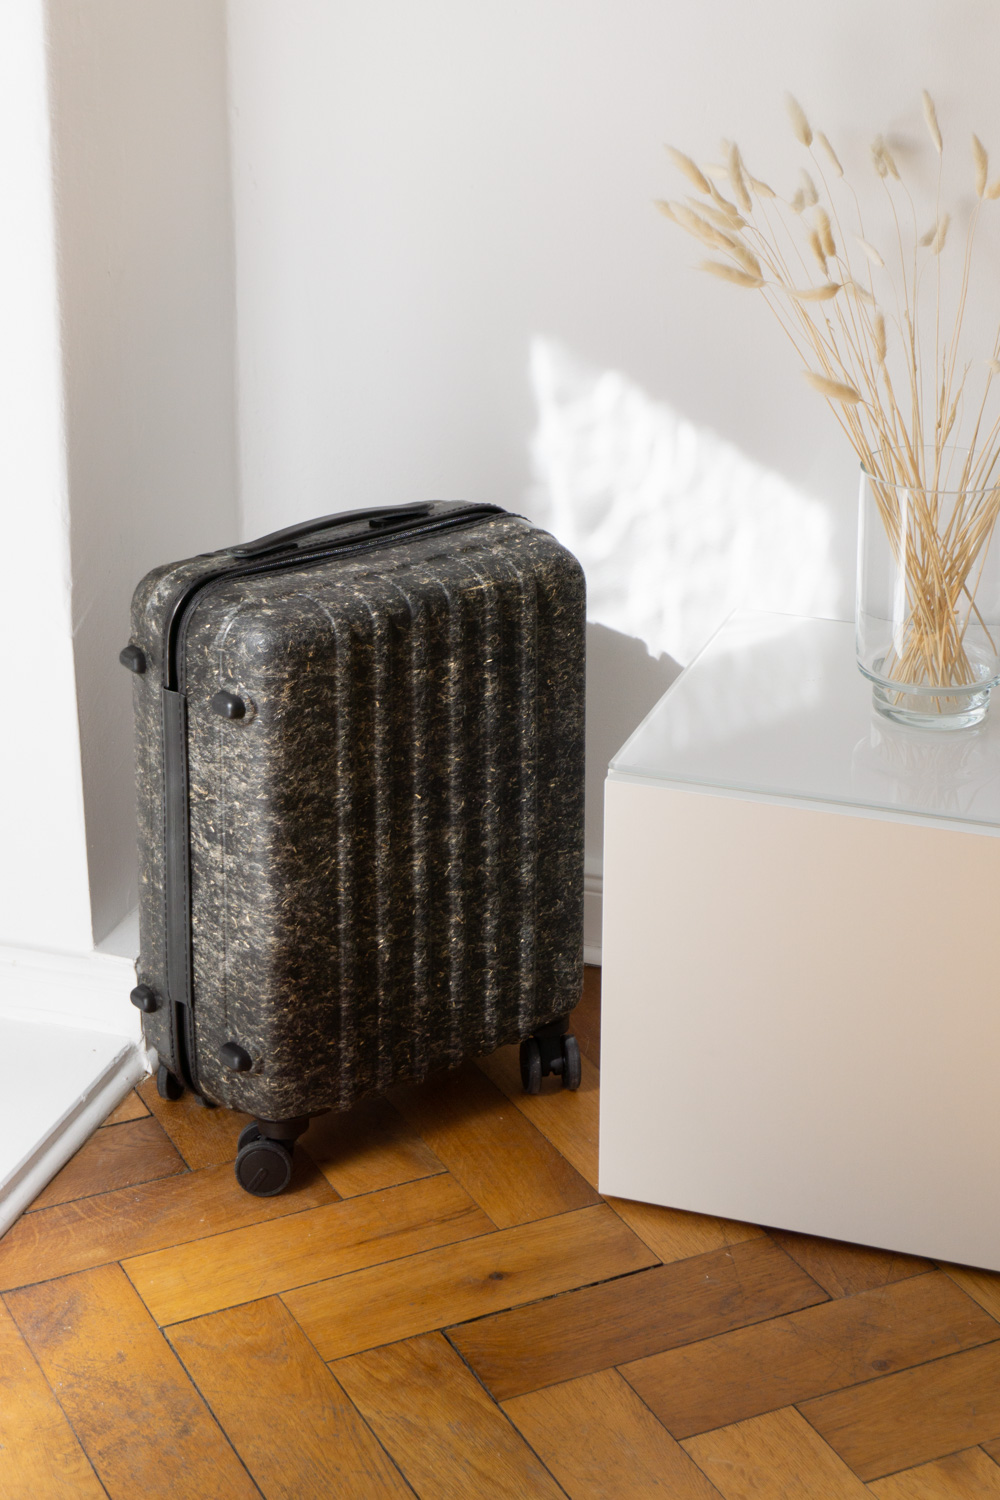 PROJECTKIN Travel Suitcase - Sustainable Luggage and travel accessories from eco friendly materials | Danish design, Scandinavian products, mindful accessories, luggage | product photography, shadows, light, minimalist aesthetic | RG Daily Blog